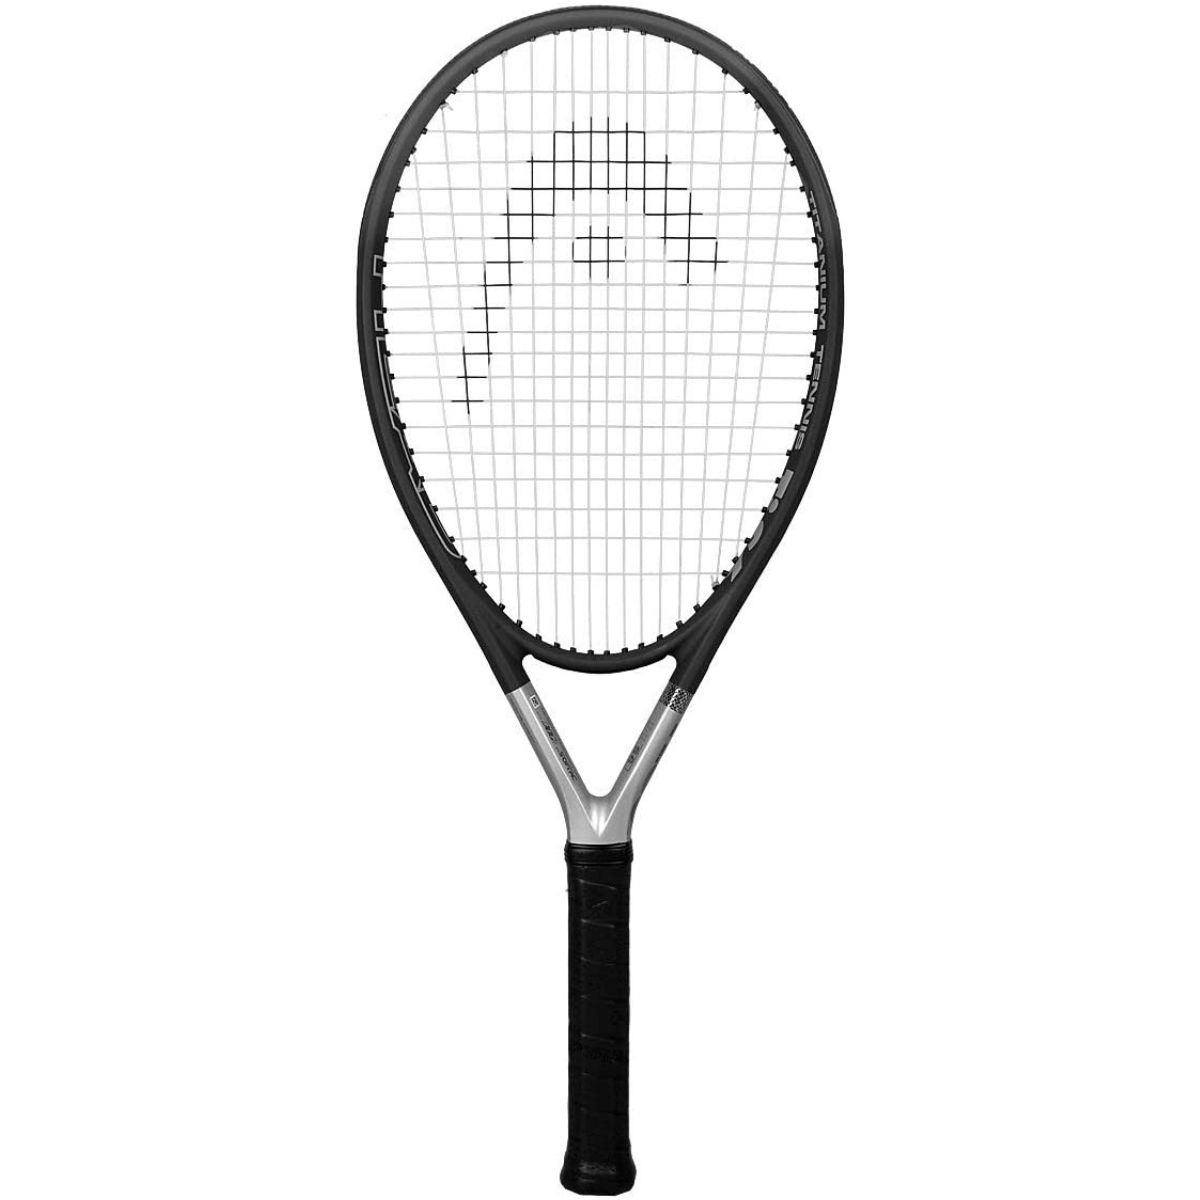 The Best Tennis Rackets for Intermediate Players Options: Head Ti.S6